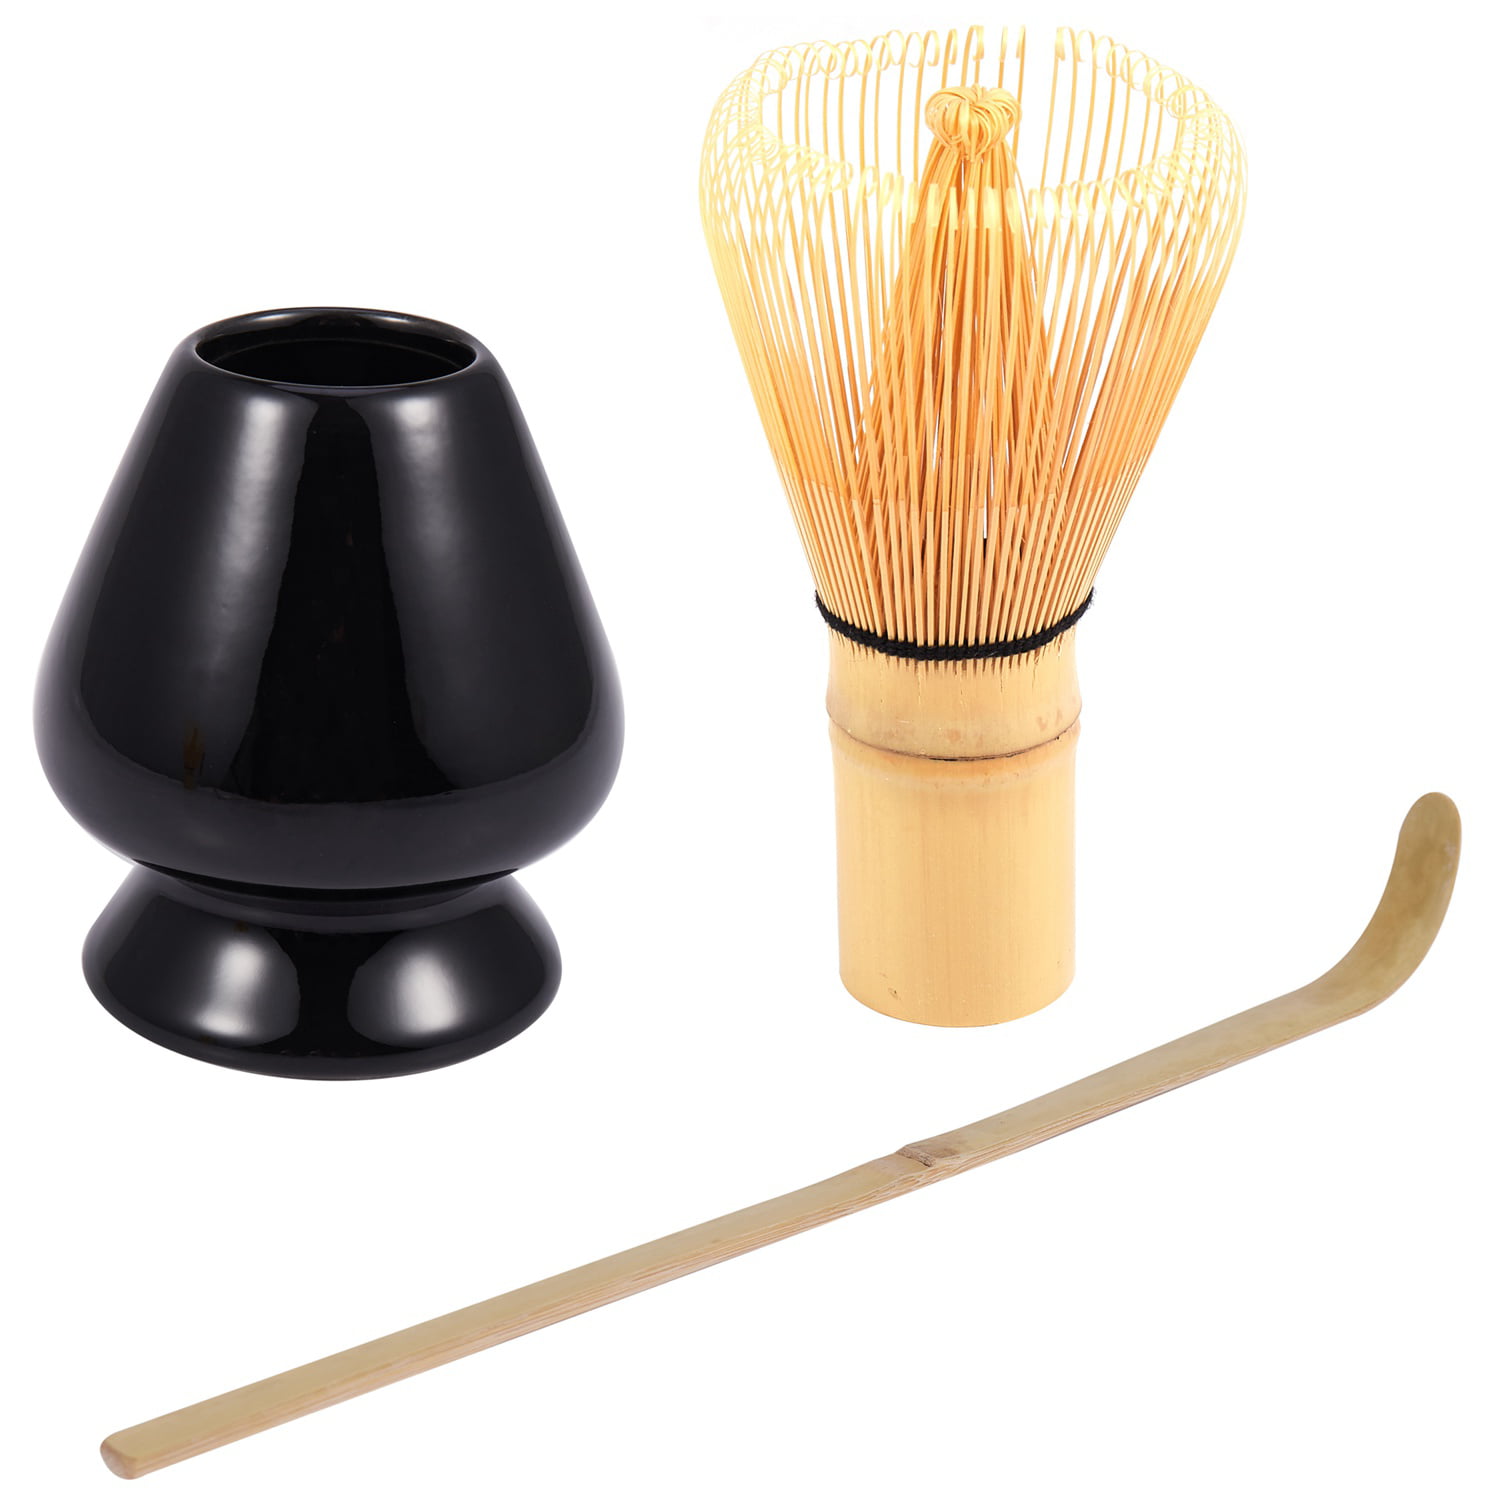 Bamboo Brush for Green Tea Making Tool Accessories Cookwares Powder Whisk Tools 